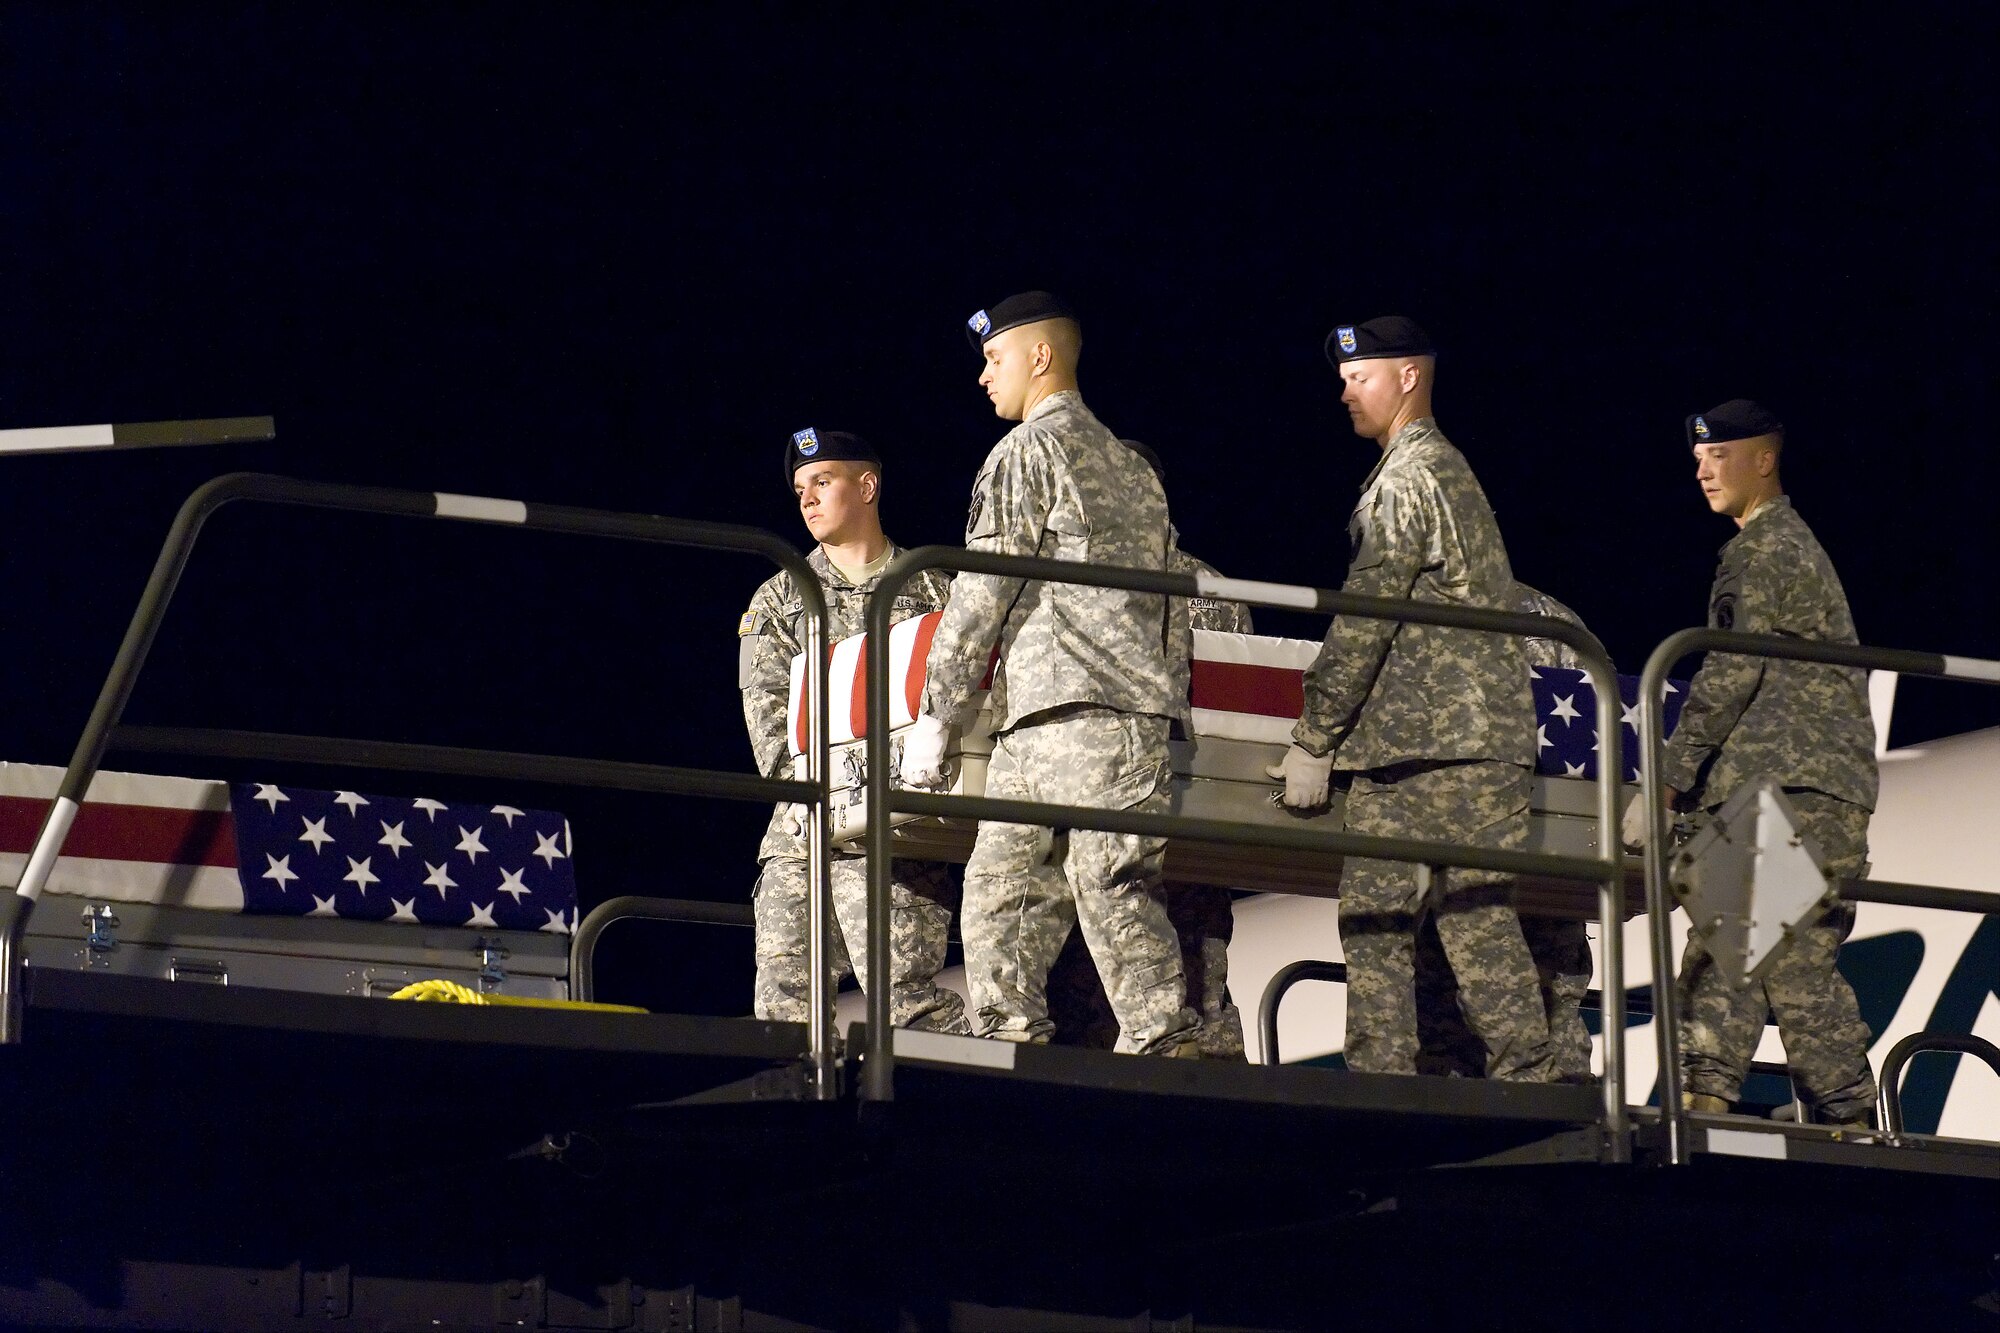 A U.S. Army carry team transfers the remains of Army Spc. Deangelo B. Snow, of Saginaw, Mich., at Dover Air Force Base, Del., Sept. 18, 2010. Snow was assigned to the 526th Brigade Support Battalion, 2nd Brigade Combat Team, 101st Airborne Division (Air Assault), Fort Campbell, Ky. (U.S. Air Force photo/Roland Balik)